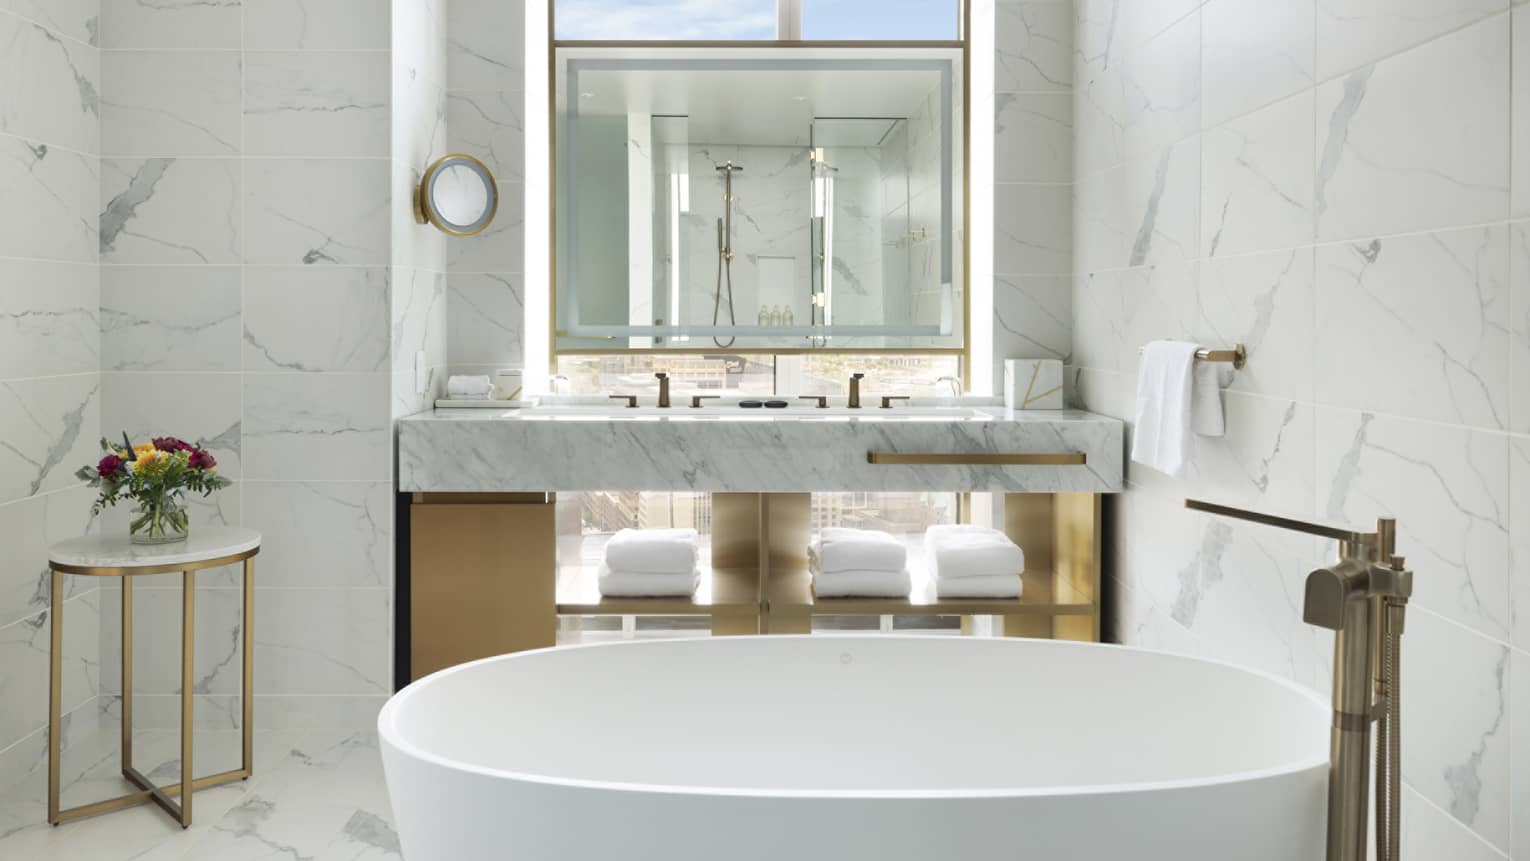 A bathroom with a deep white tub, small table, sink area with towels on shelves and a mirror.